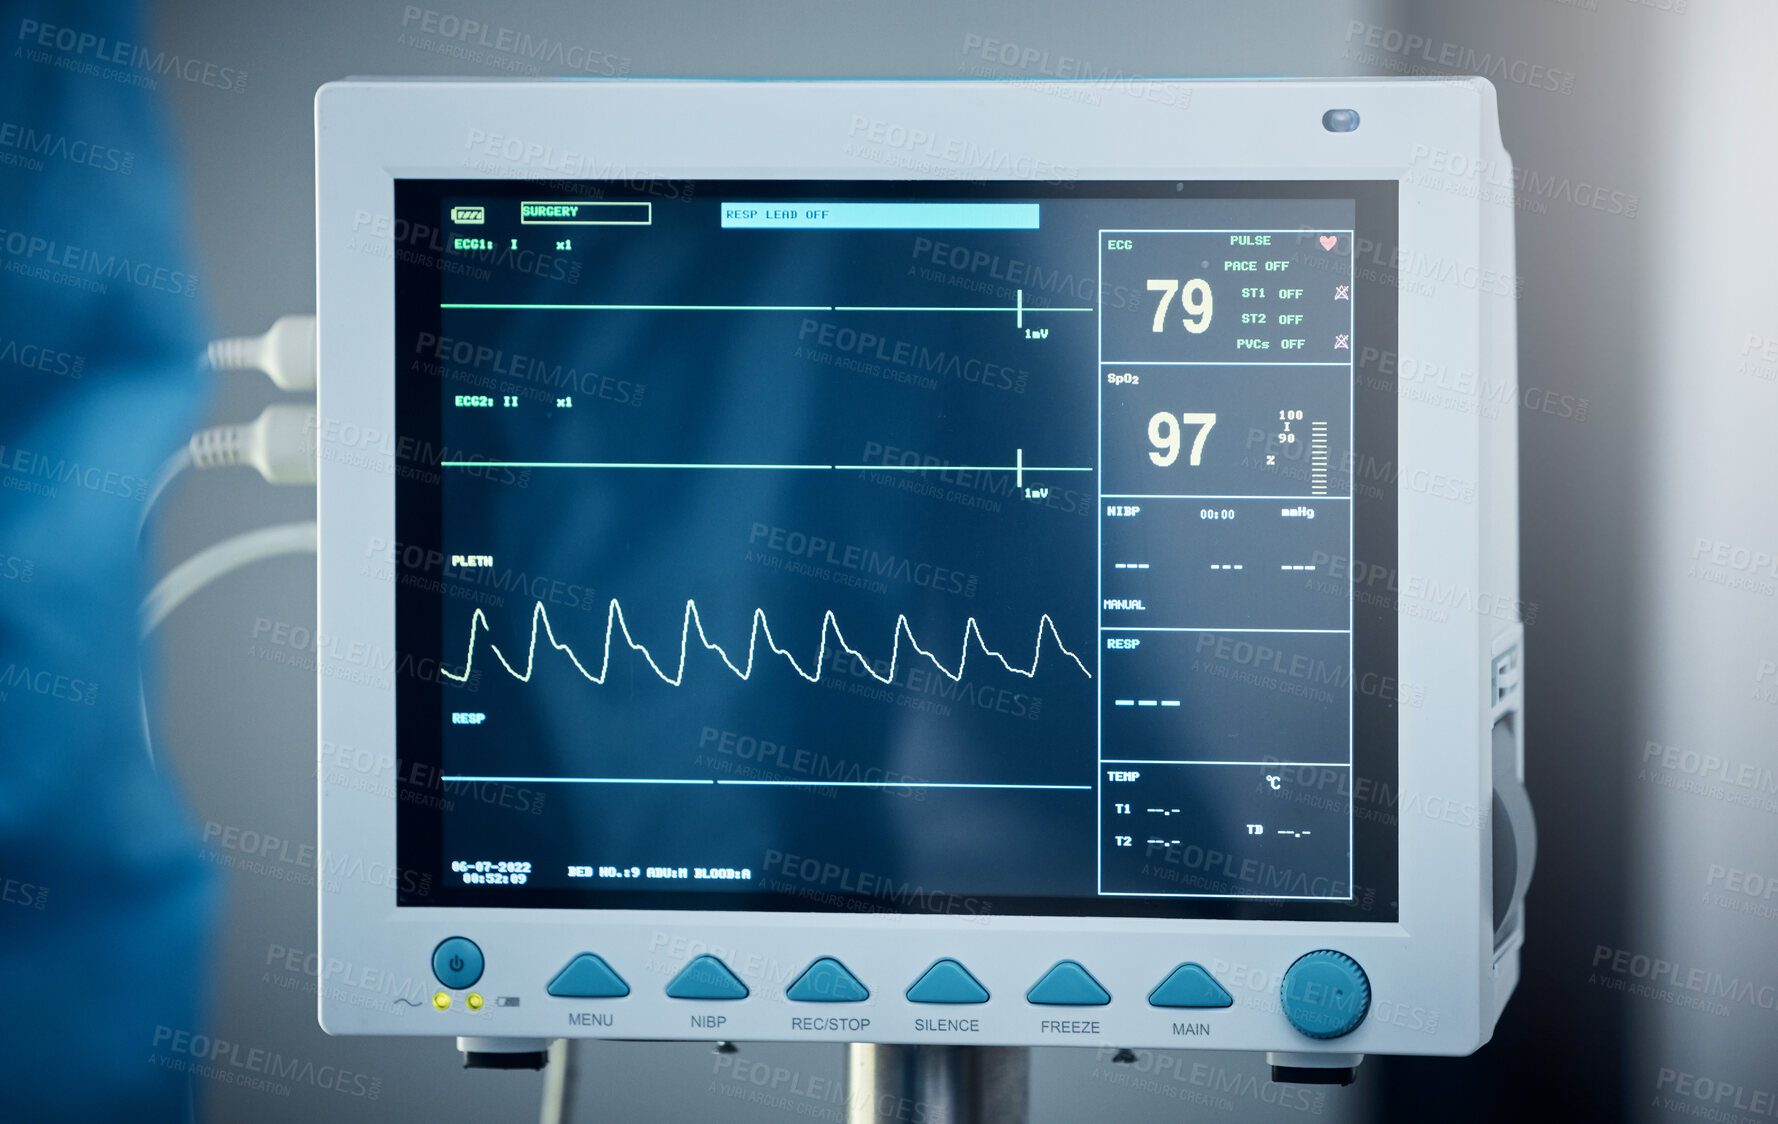 Buy stock photo Healthcare, hospital and electrocardiogram monitor or screen. Medical tool, ecg equipment and heart rate device to measure pulse, heartbeat and electrical activity of heart for cardiovascular health.